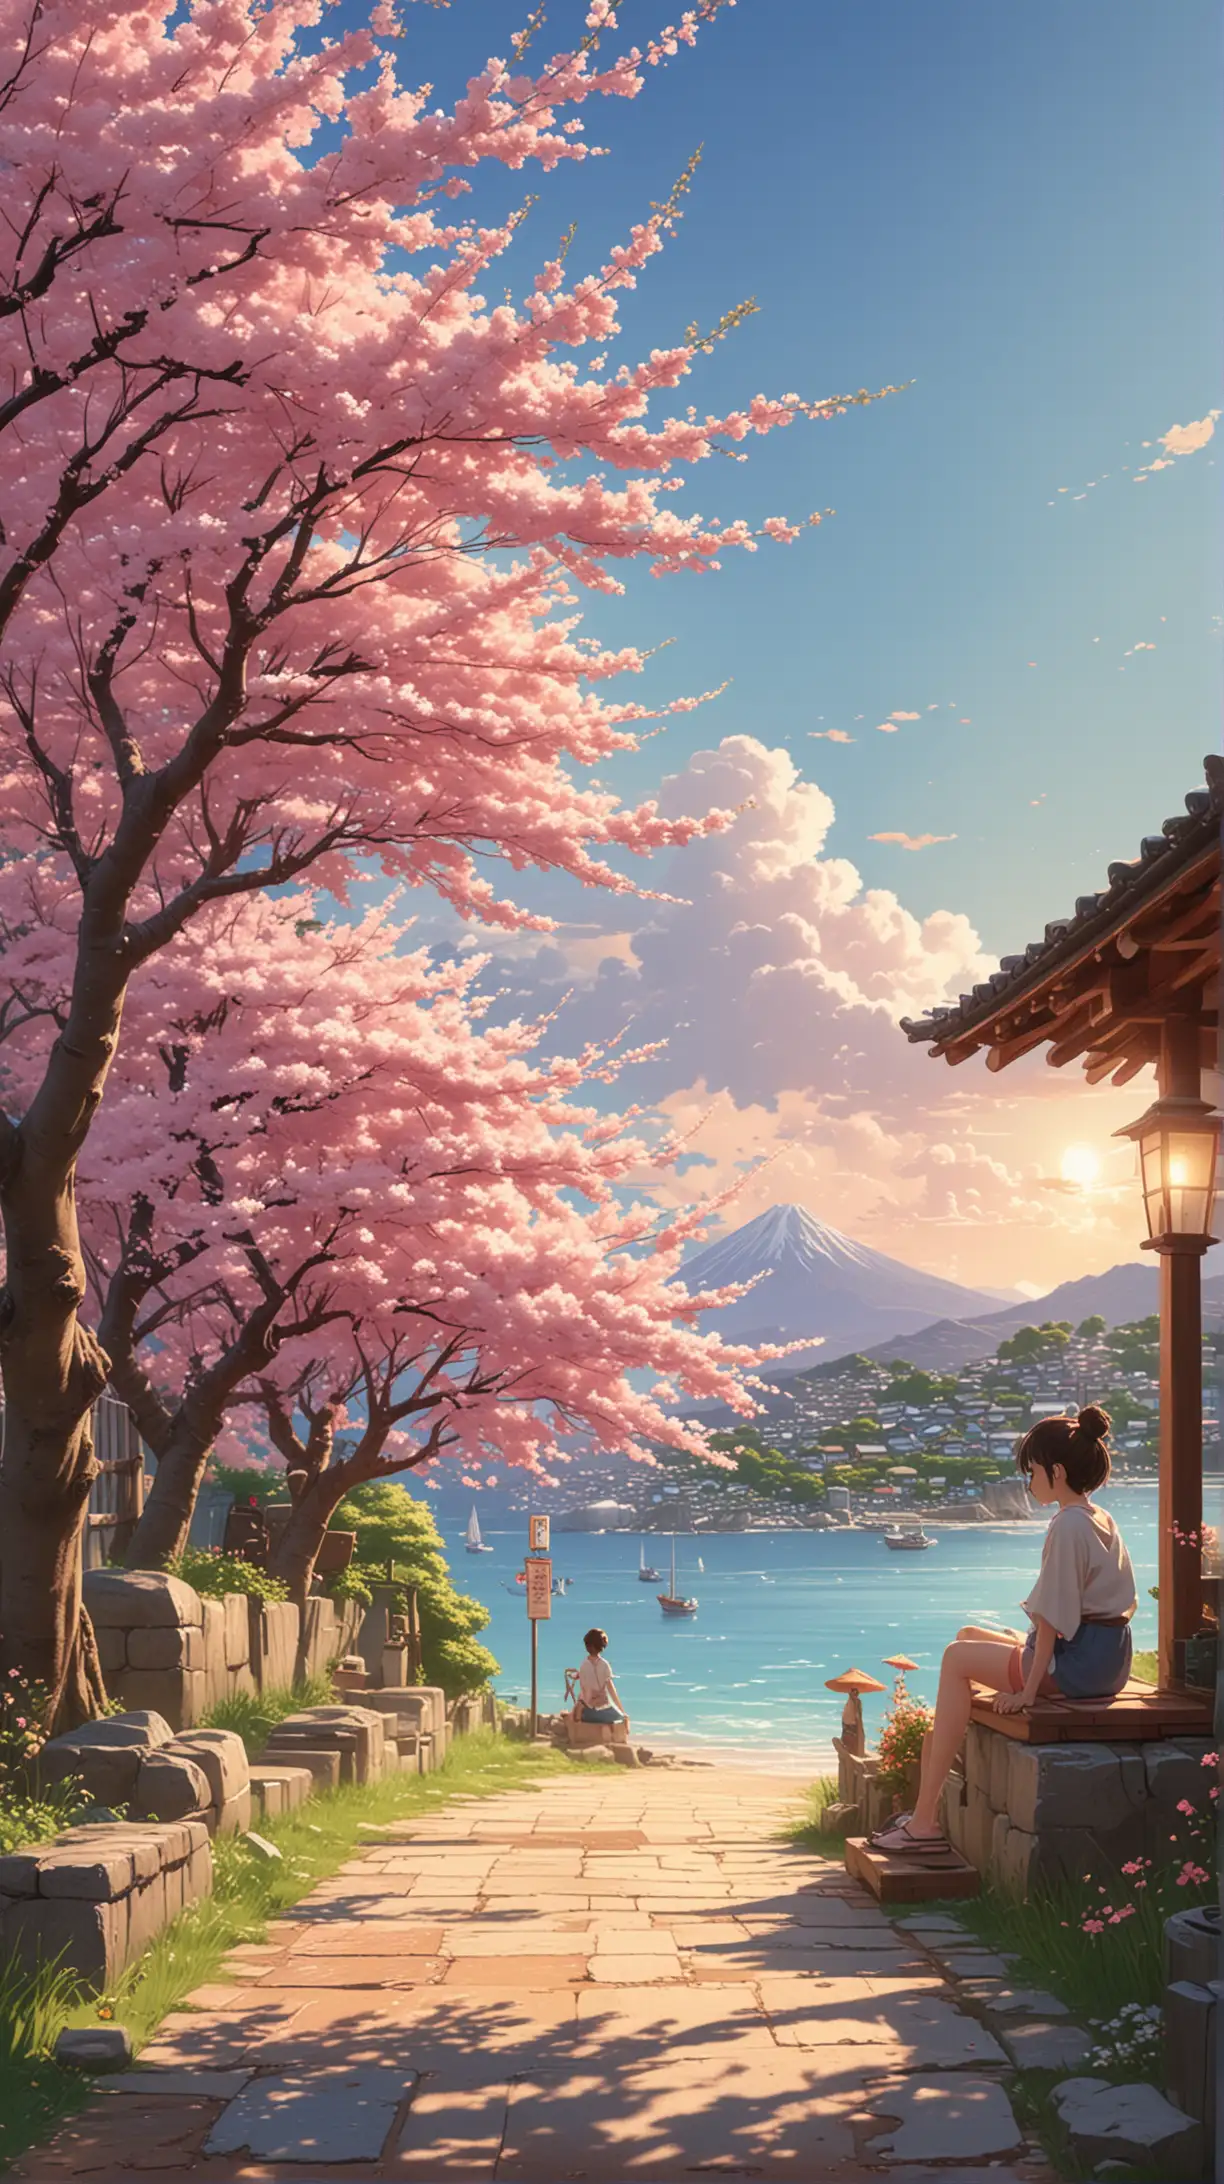 Tranquil Japanese Village Girl Under Cherry Blossom Tree with Ocean View